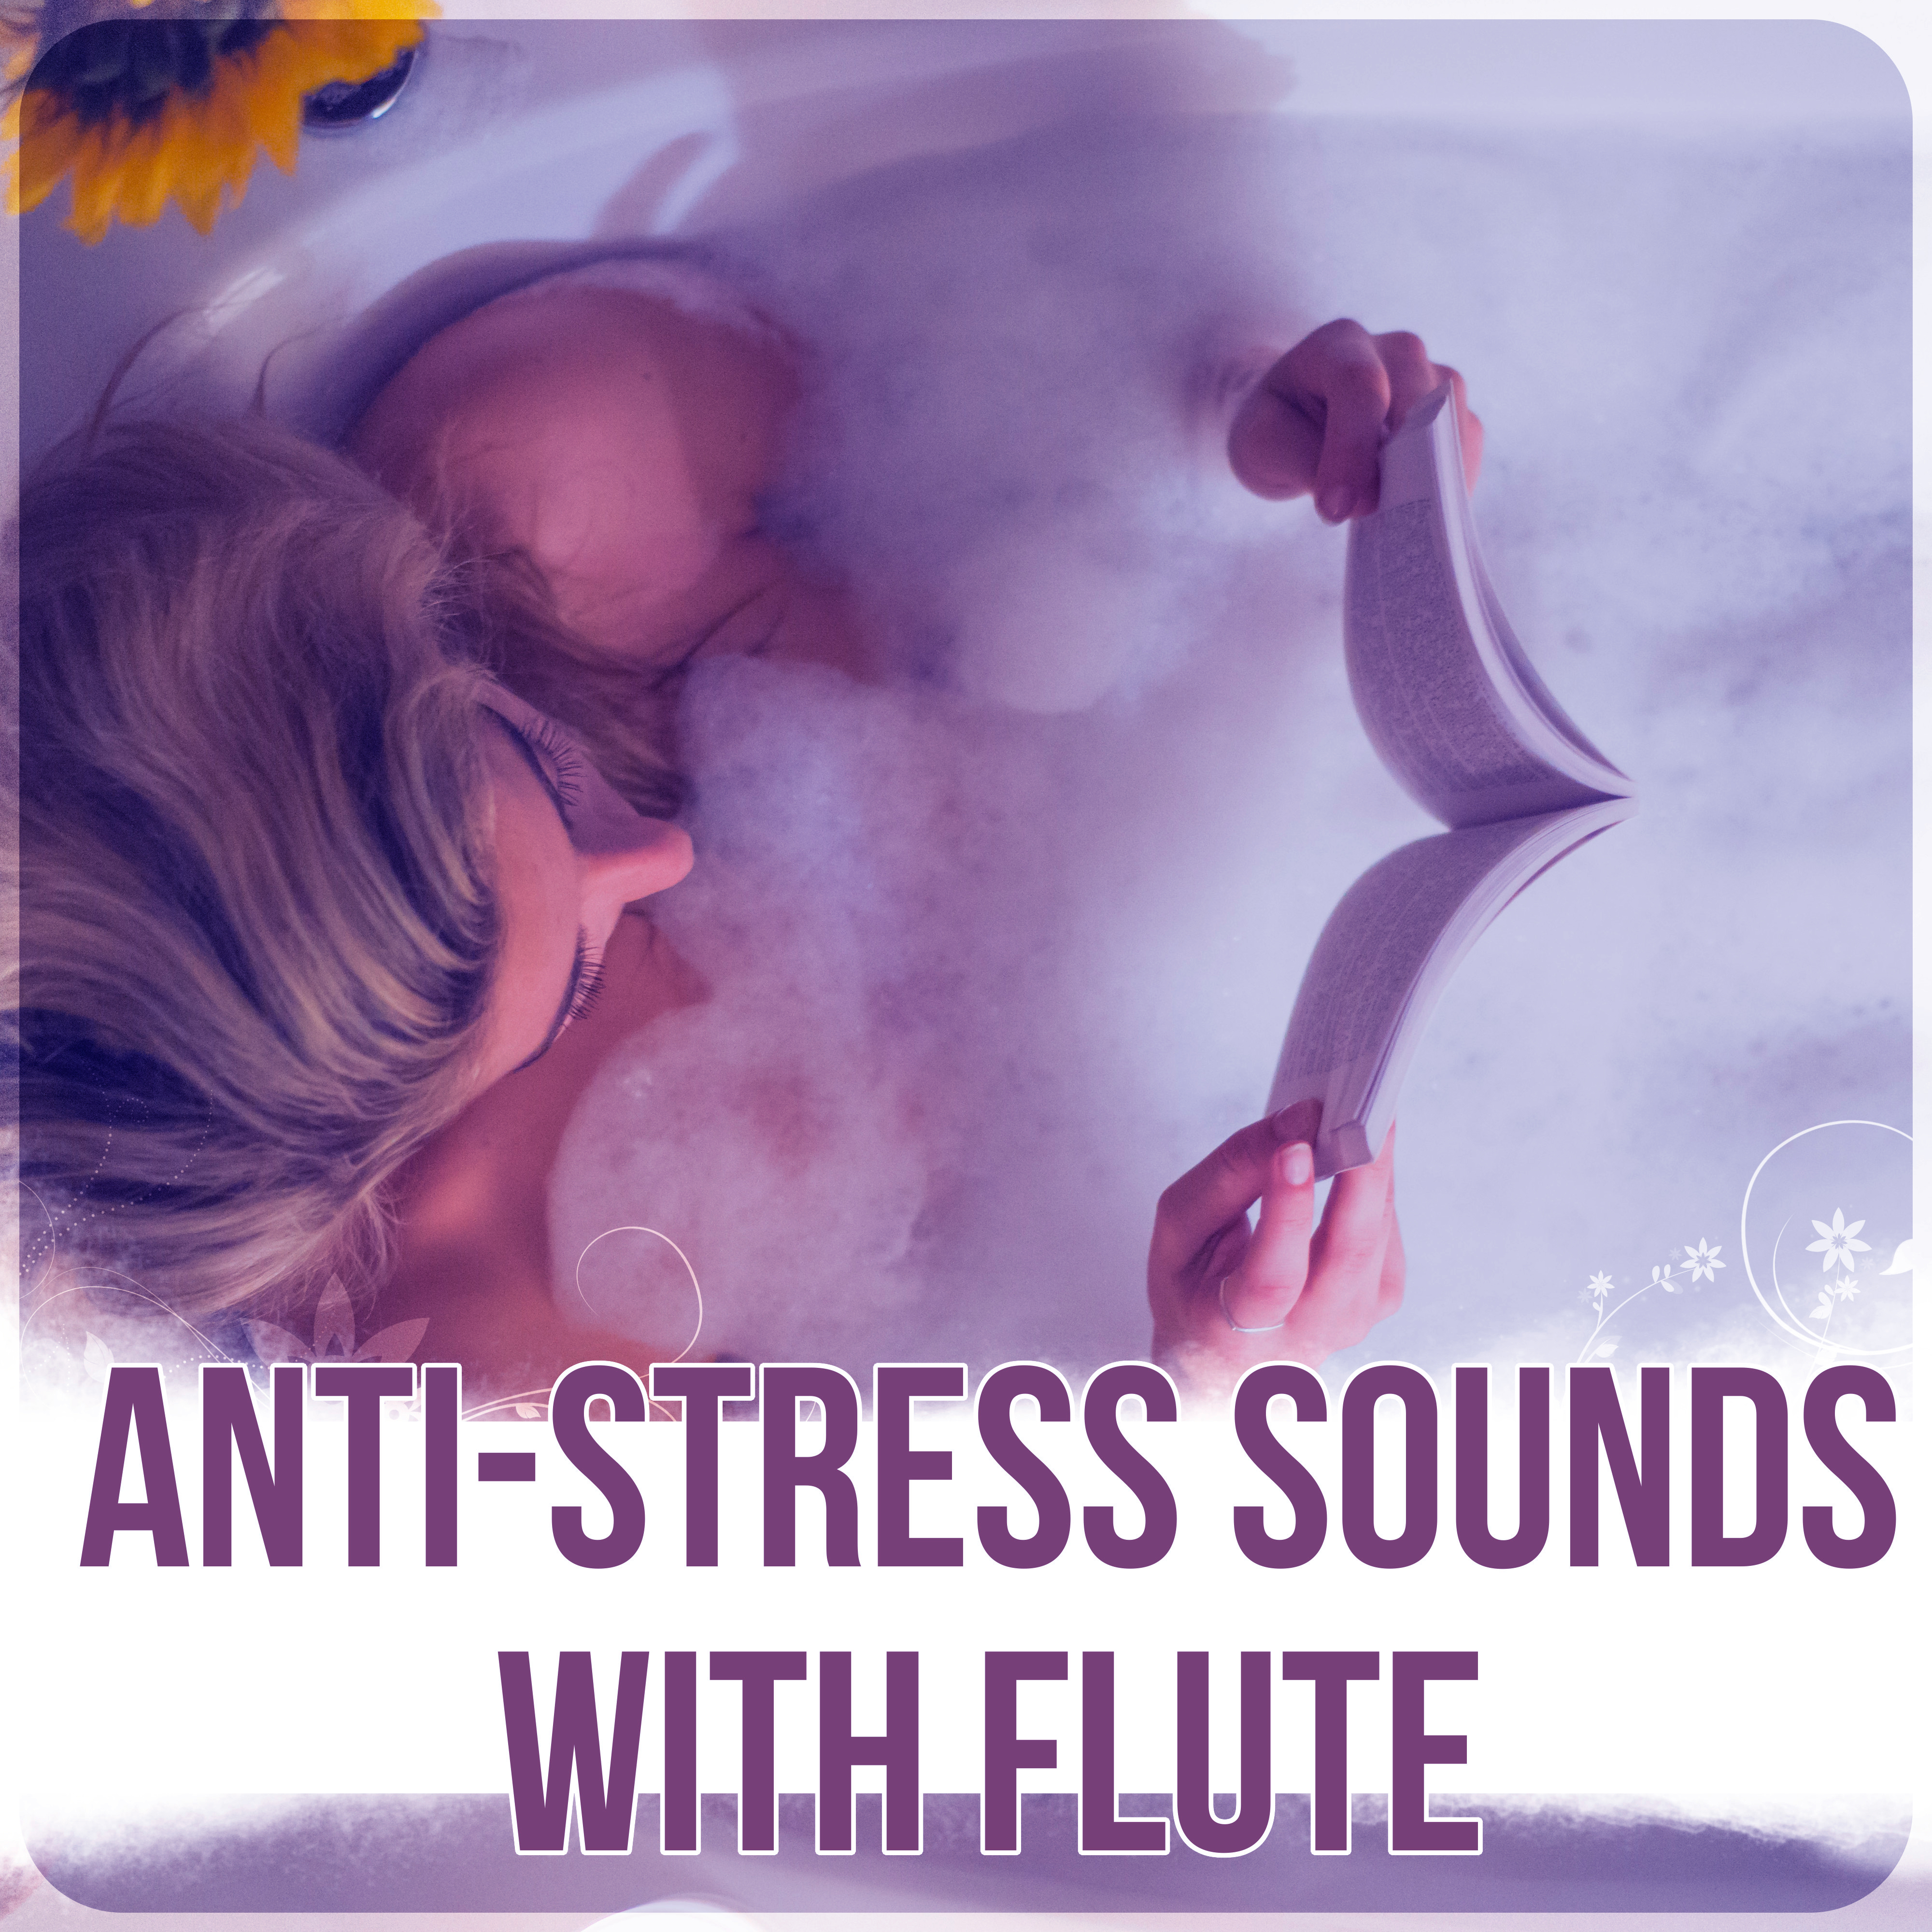 Anti-Stress Sounds with Flute -  Calm Background Music for Homework, Calm Flute Sounds, Brain Power, Relaxing Music